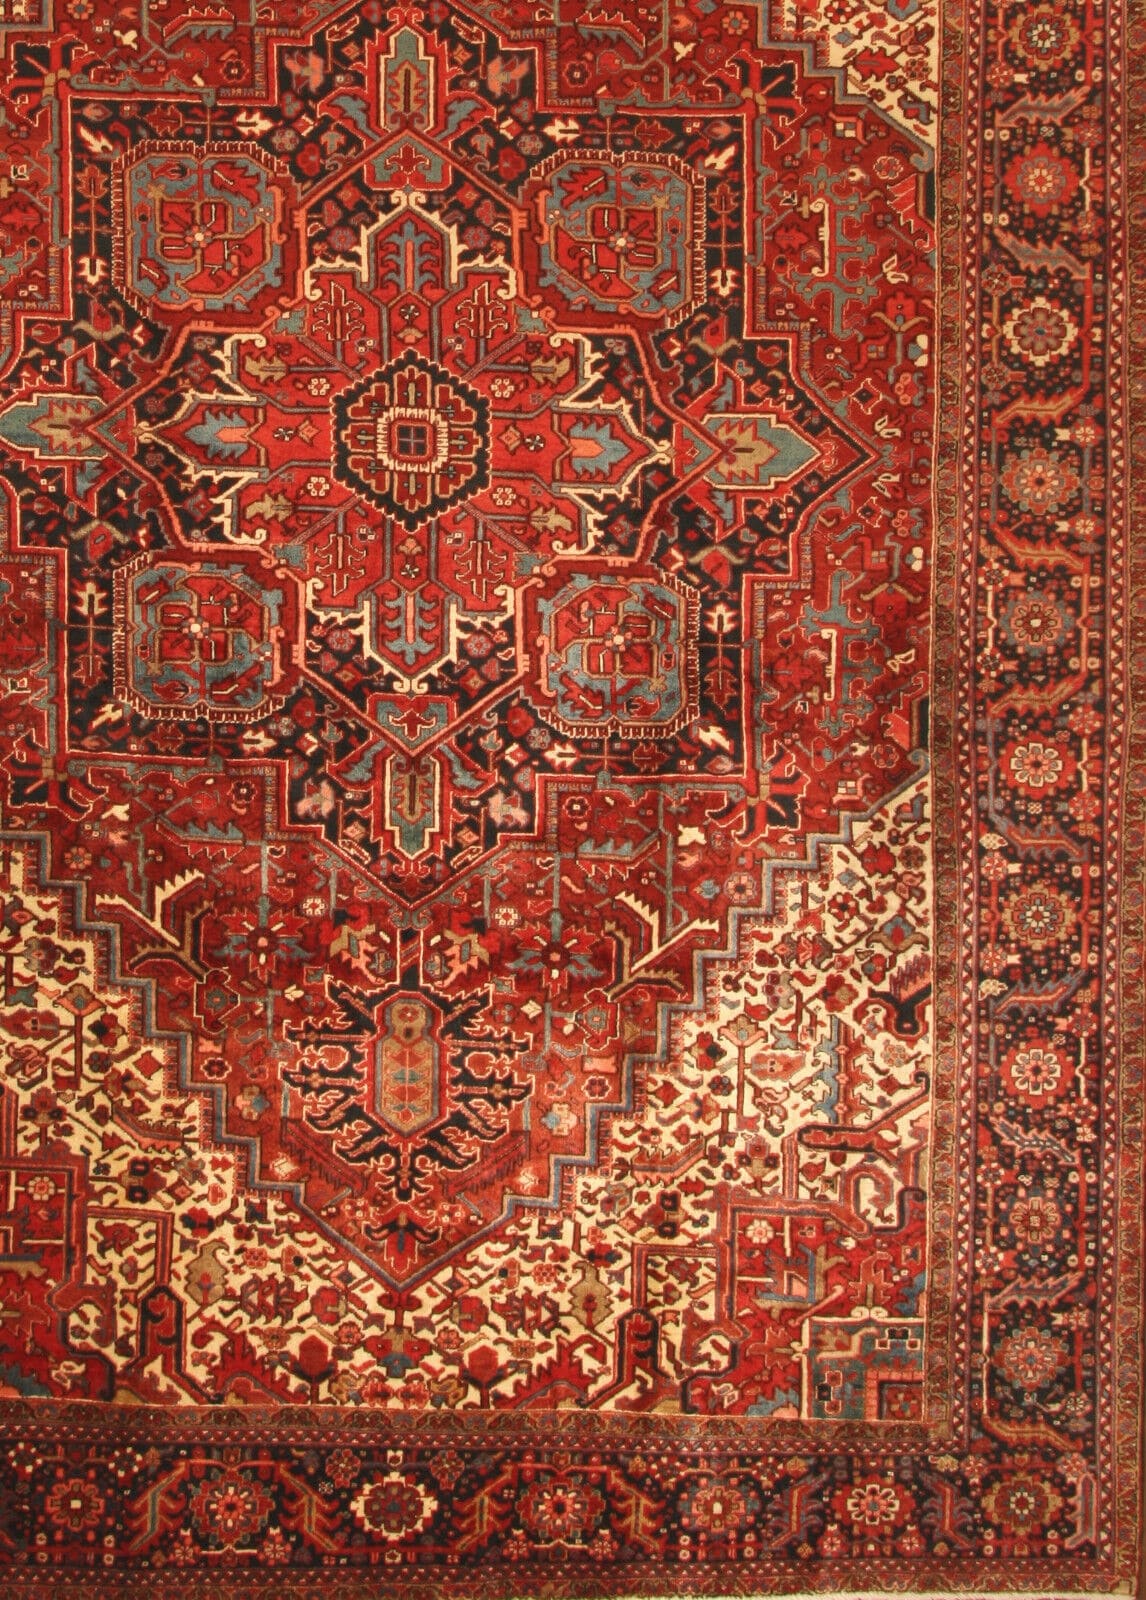 Overhead shot of the Handmade Vintage Persian Style Heriz Rug displaying size and dimensions